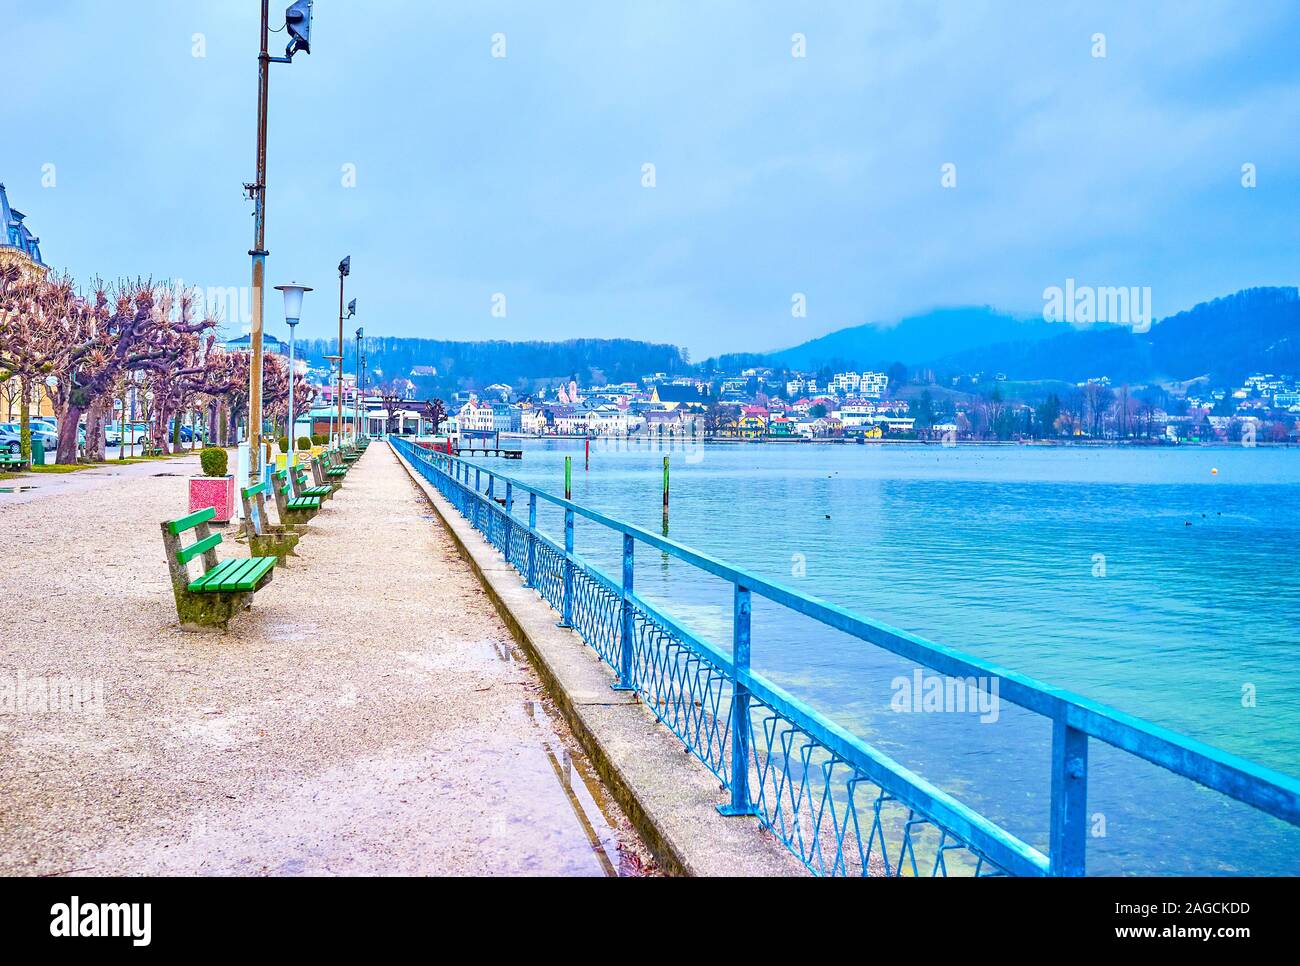 The promenade in Gmunden, the small town in Salzkammergut region on the bank of Traun lake, Austria Stock Photo